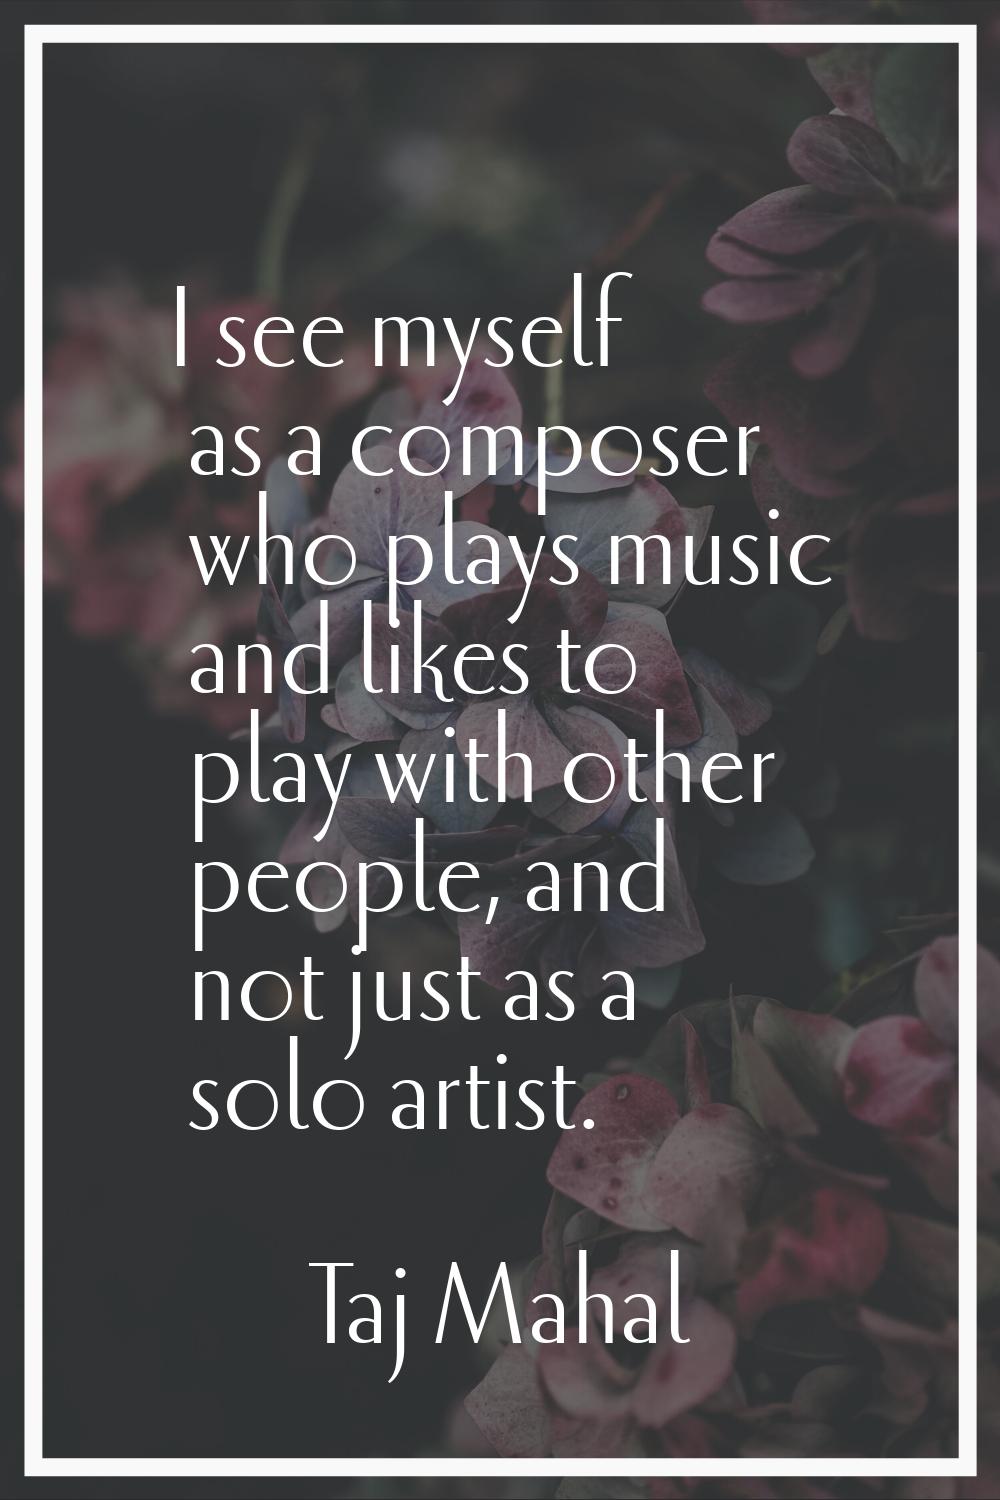 I see myself as a composer who plays music and likes to play with other people, and not just as a s